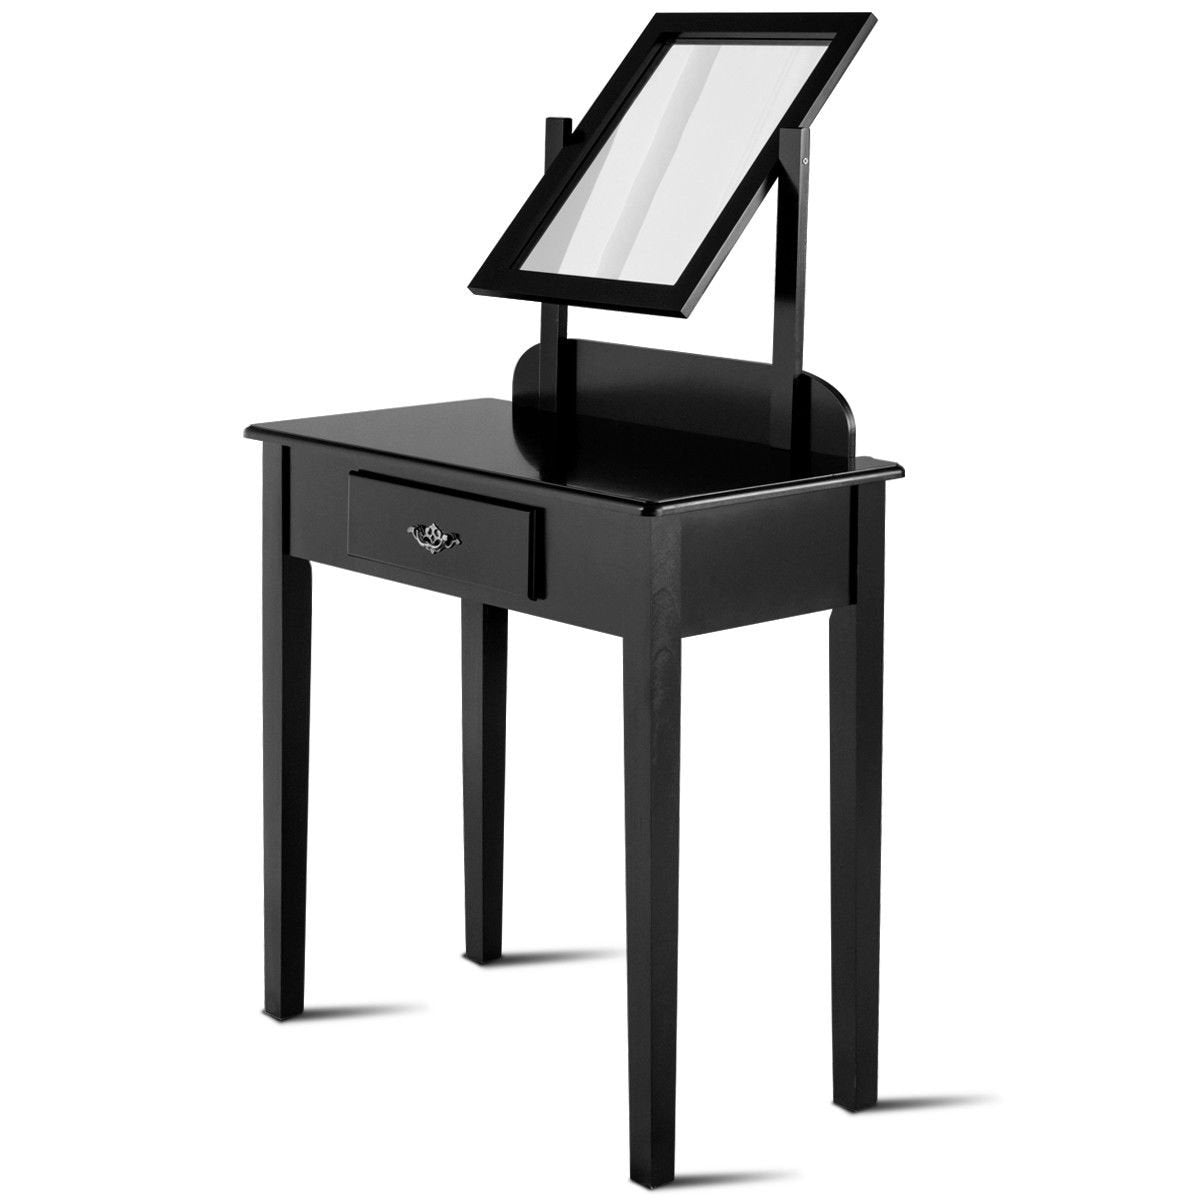 Vanity Dressing Table Stool Set with Large Makeup Mirror, Black - Gallery Canada